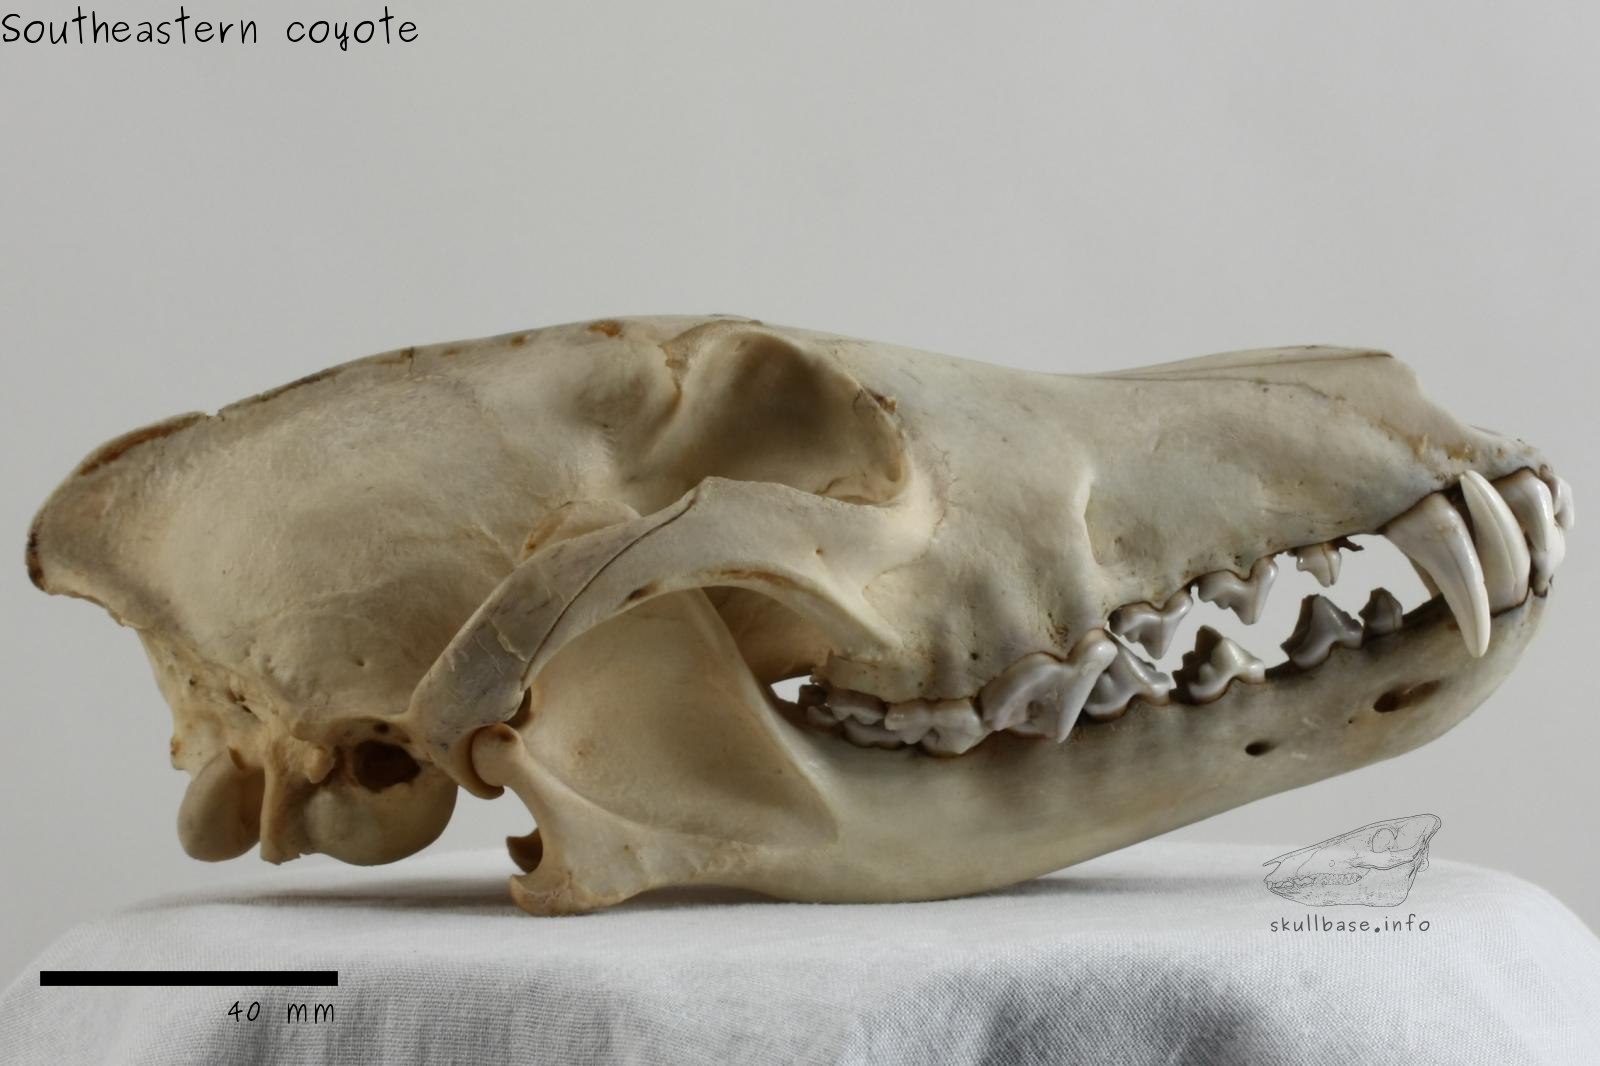 Southeastern coyote (Canis latrans frustor) skull lateral view